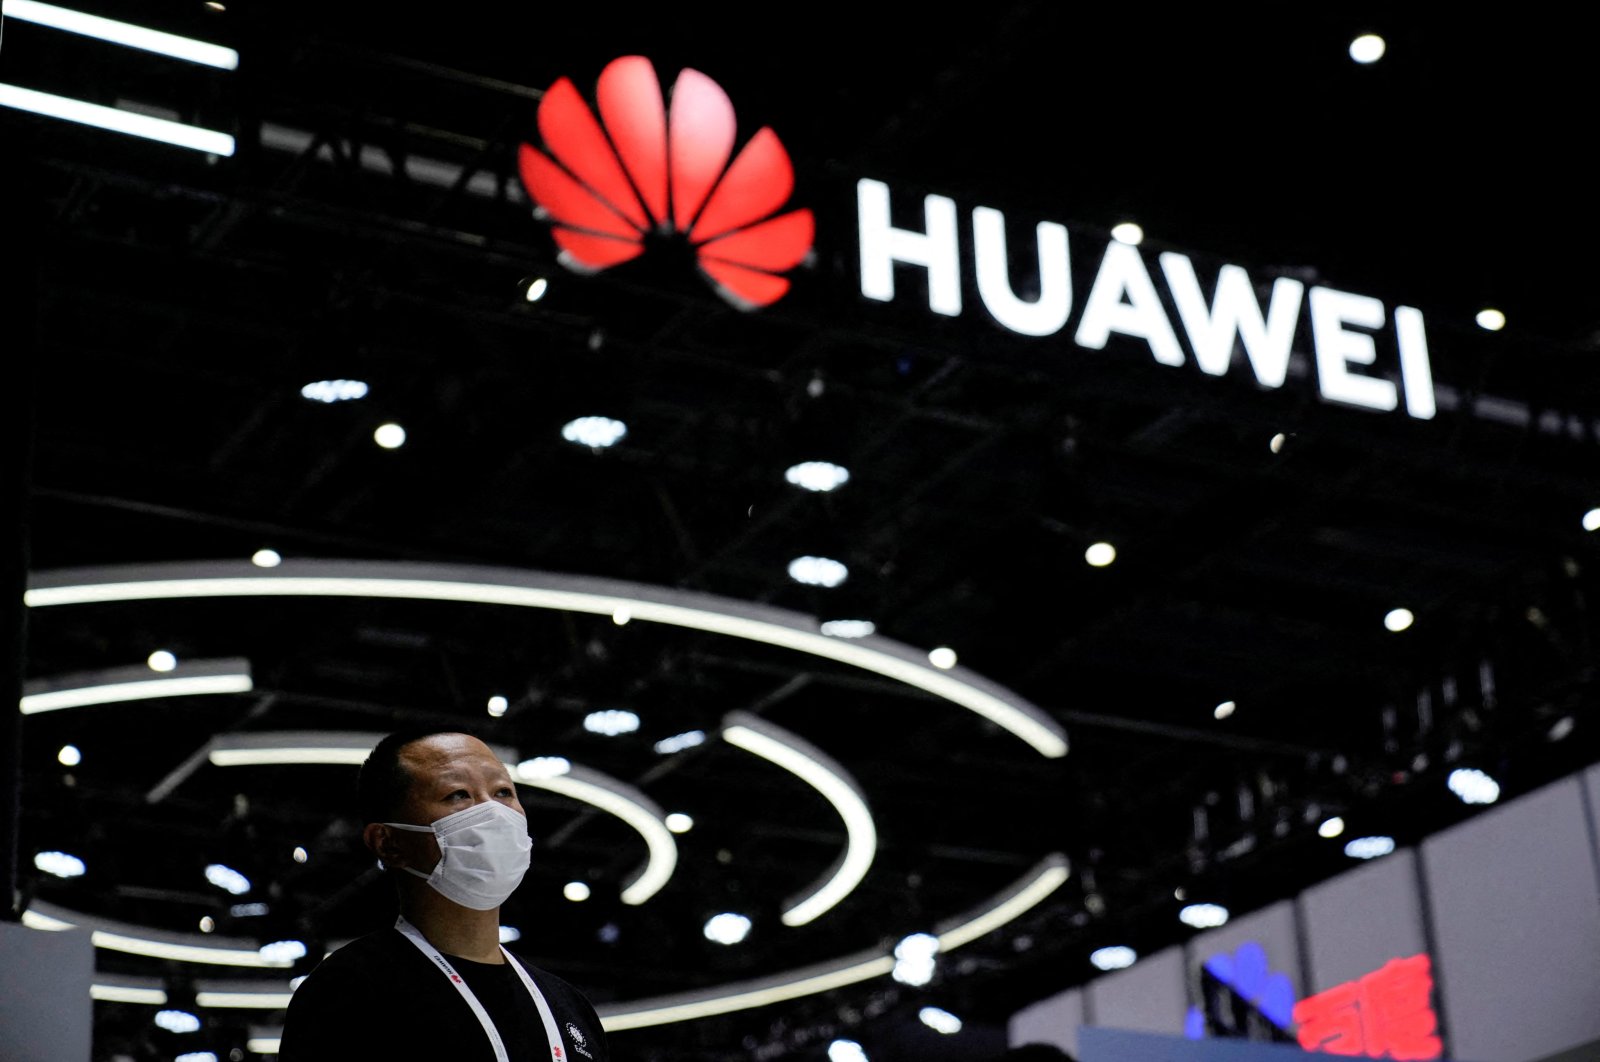 A person stands by a sign of Huawei during the World Artificial Intelligence Conference, in Shanghai, China, Sept. 1, 2022. (Reuters Photo)